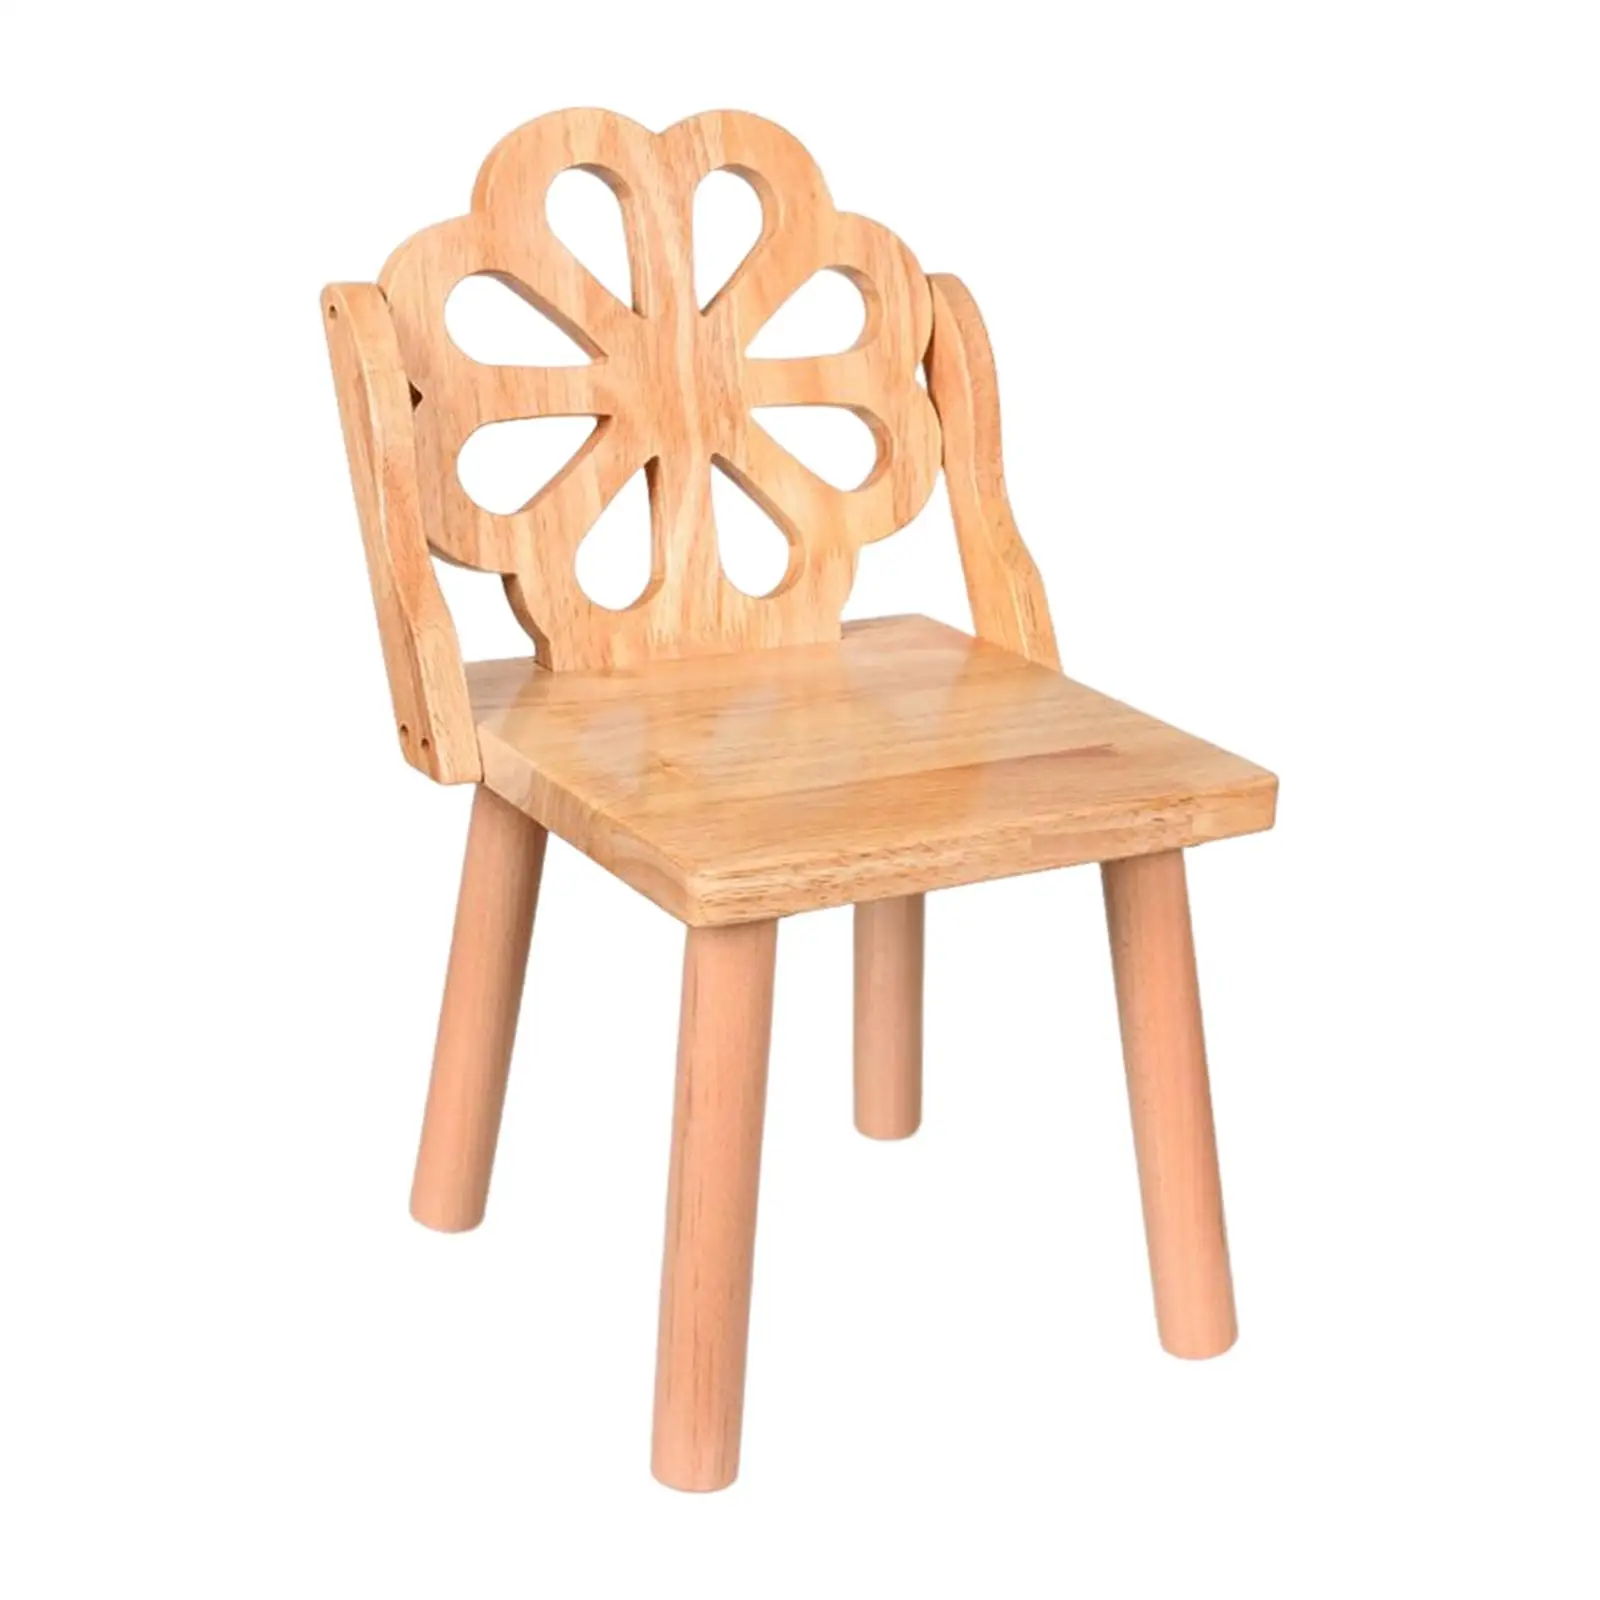 Household Removable Wooden Child Stool Heavy Duty Lightweight Durable Wood Wooden Kindergarten game for Bedside Bathroom